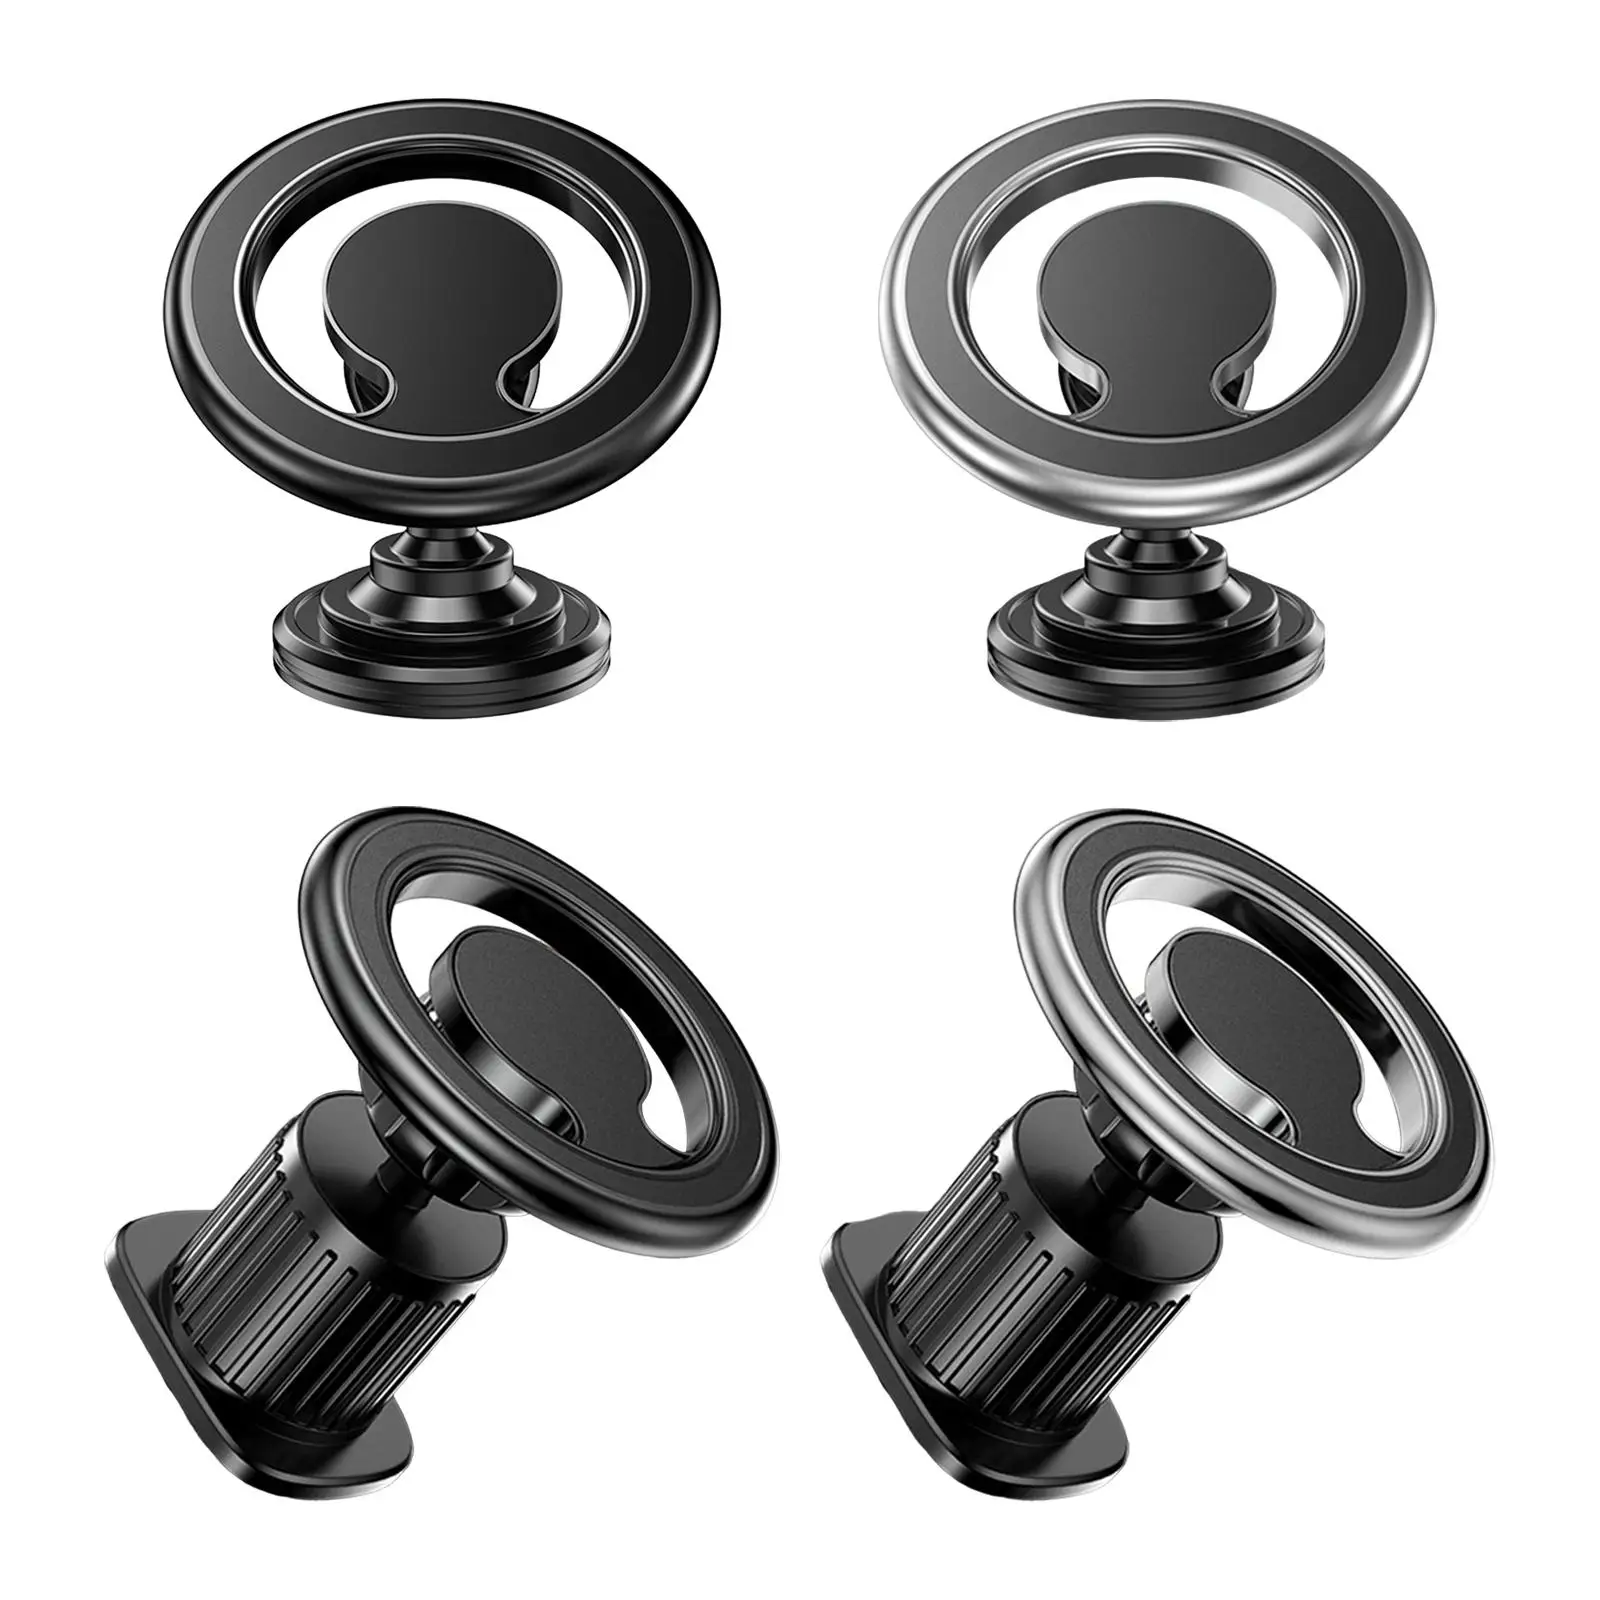 Compact Magnetic Car Phone Holder Mount 360 Degree Rotatable for Most 4.7-7.2inch Smartphones Hands Free Phone Cradle